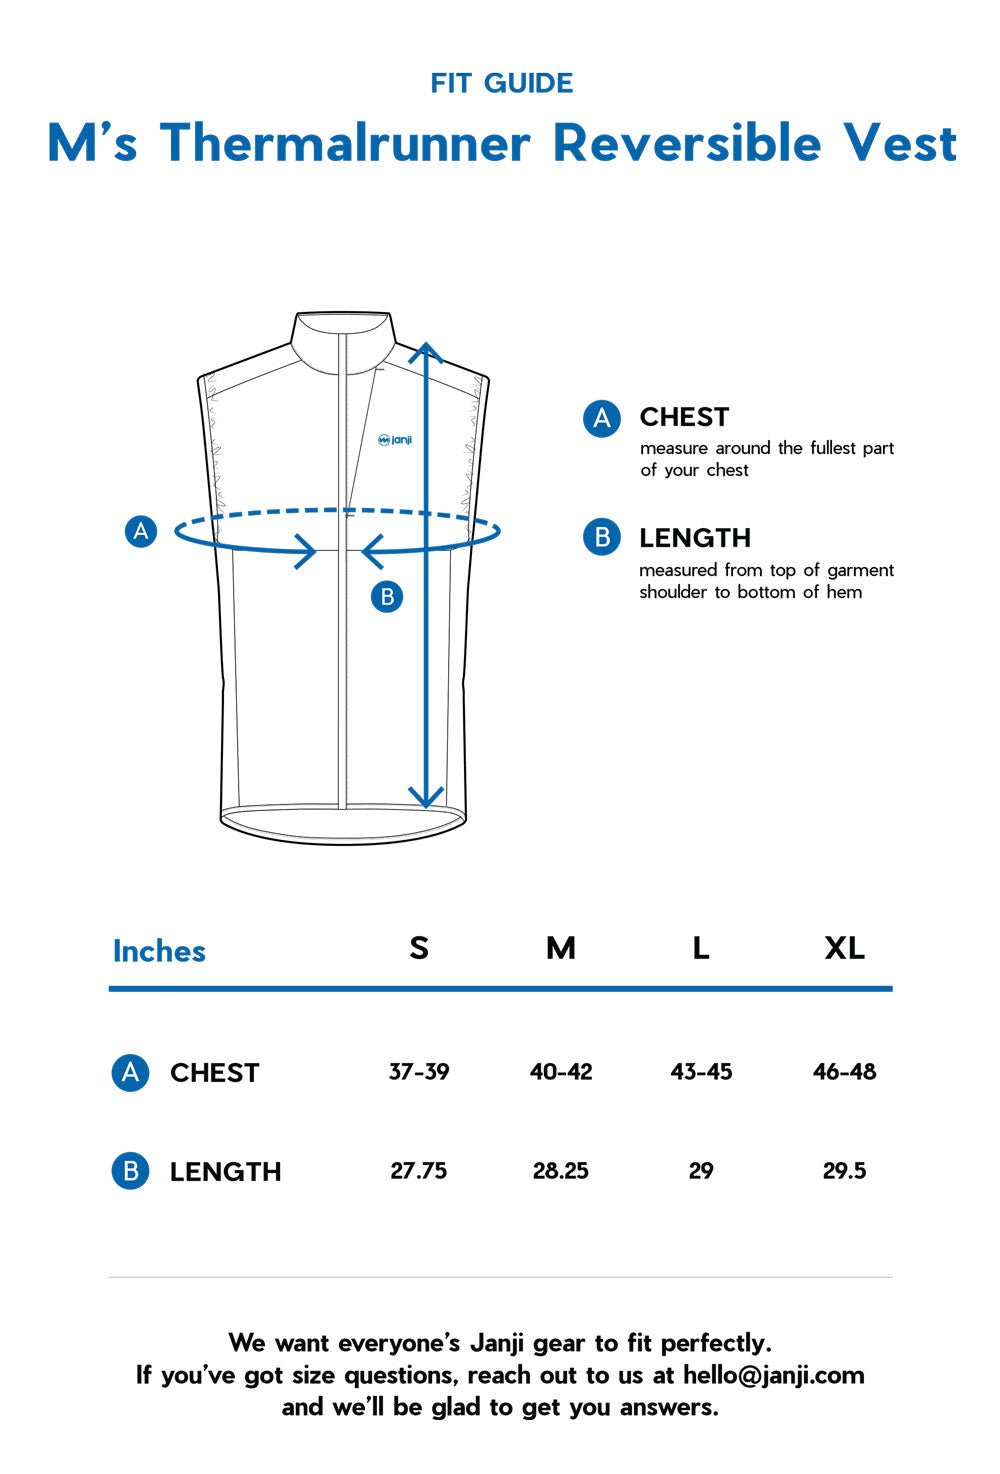 M's Thermalrunner Reversible Vest size guide